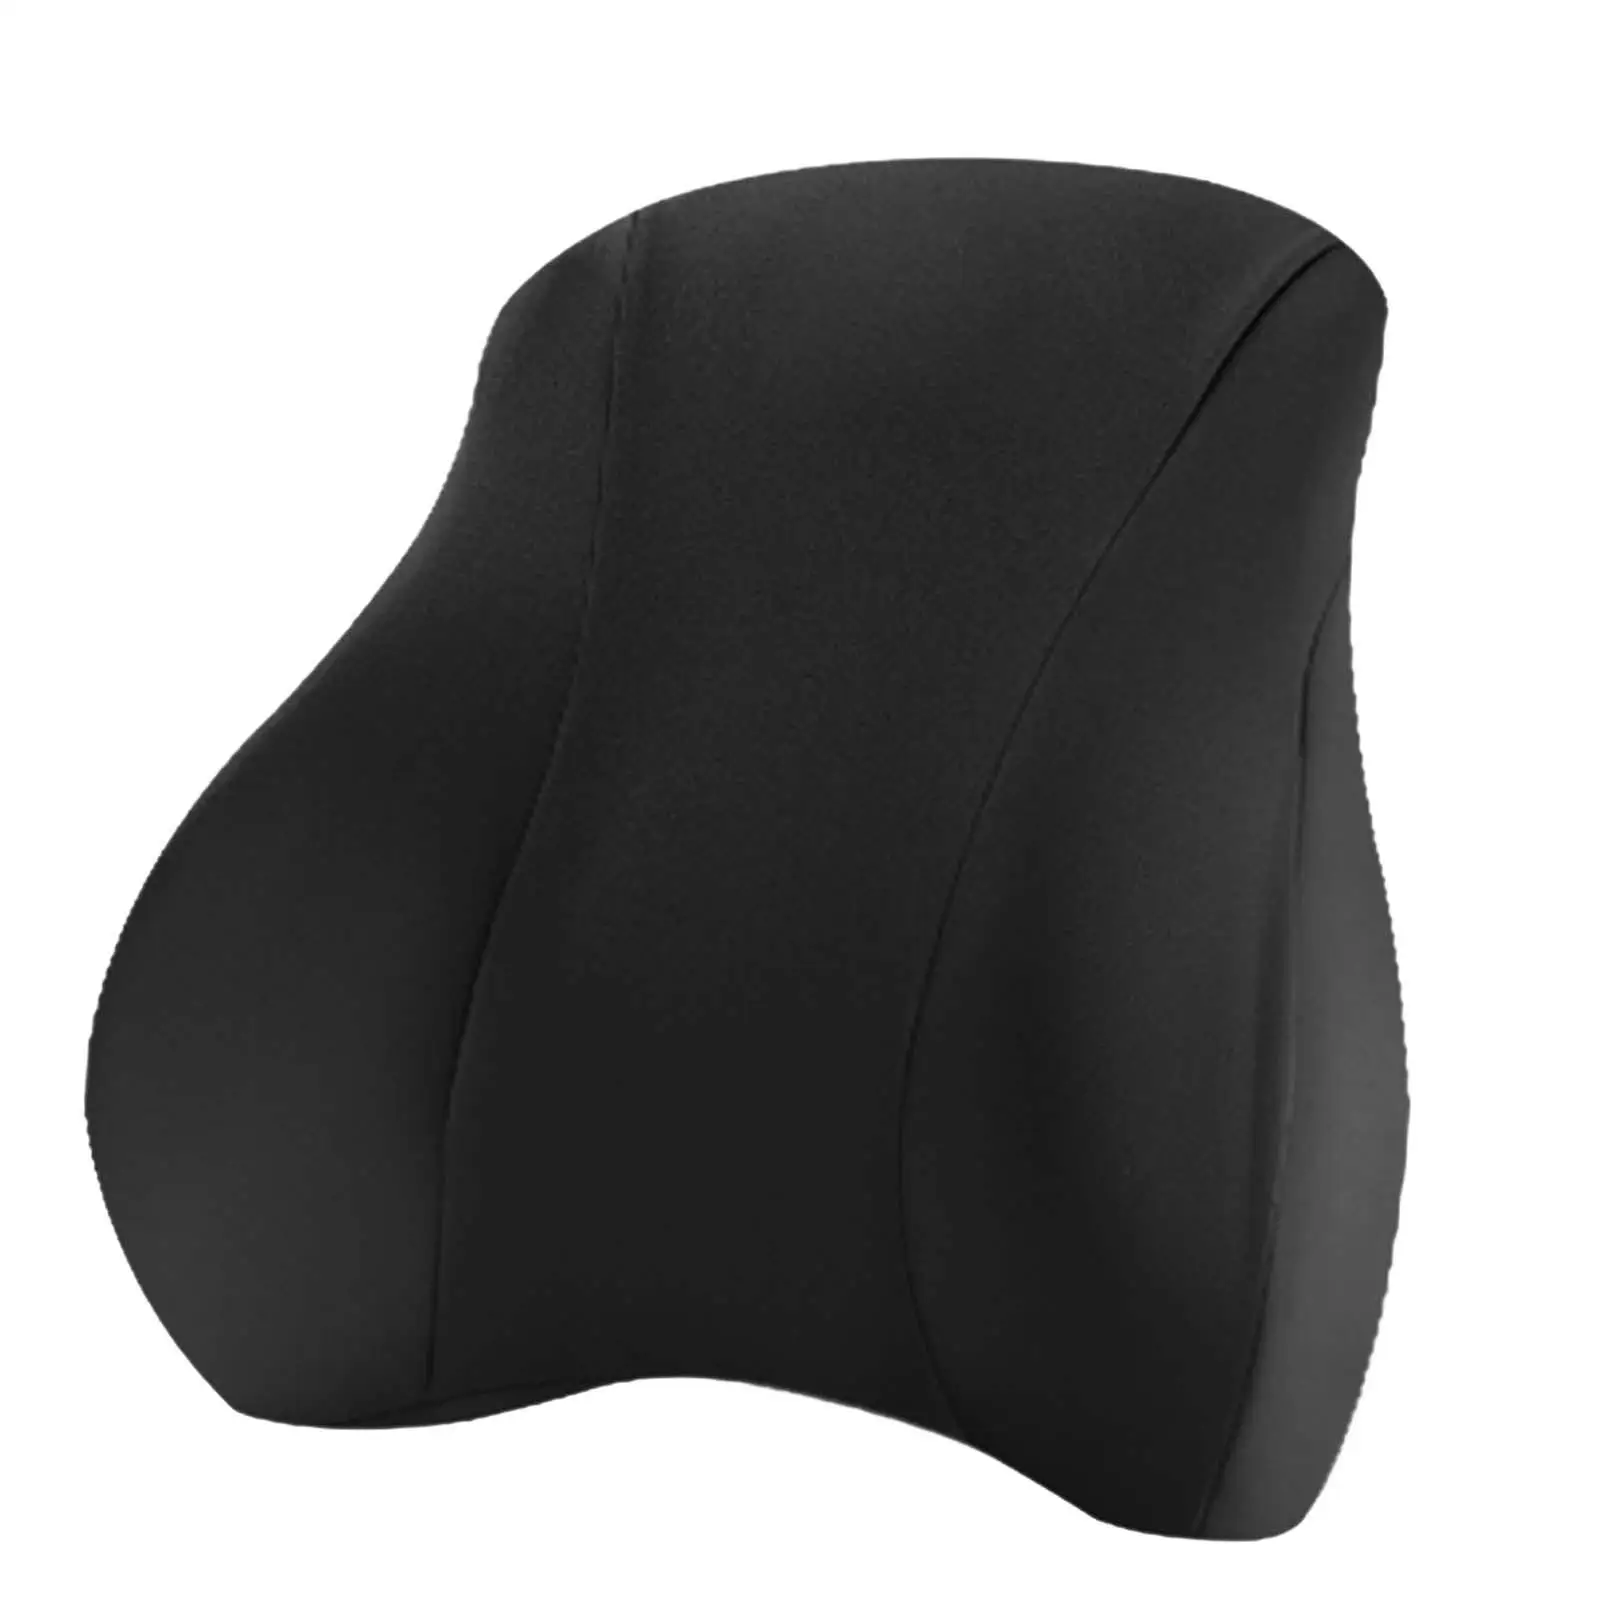 Memory Foam Support Pillow Comfortable for Byd Atto 3 Yuan Plus